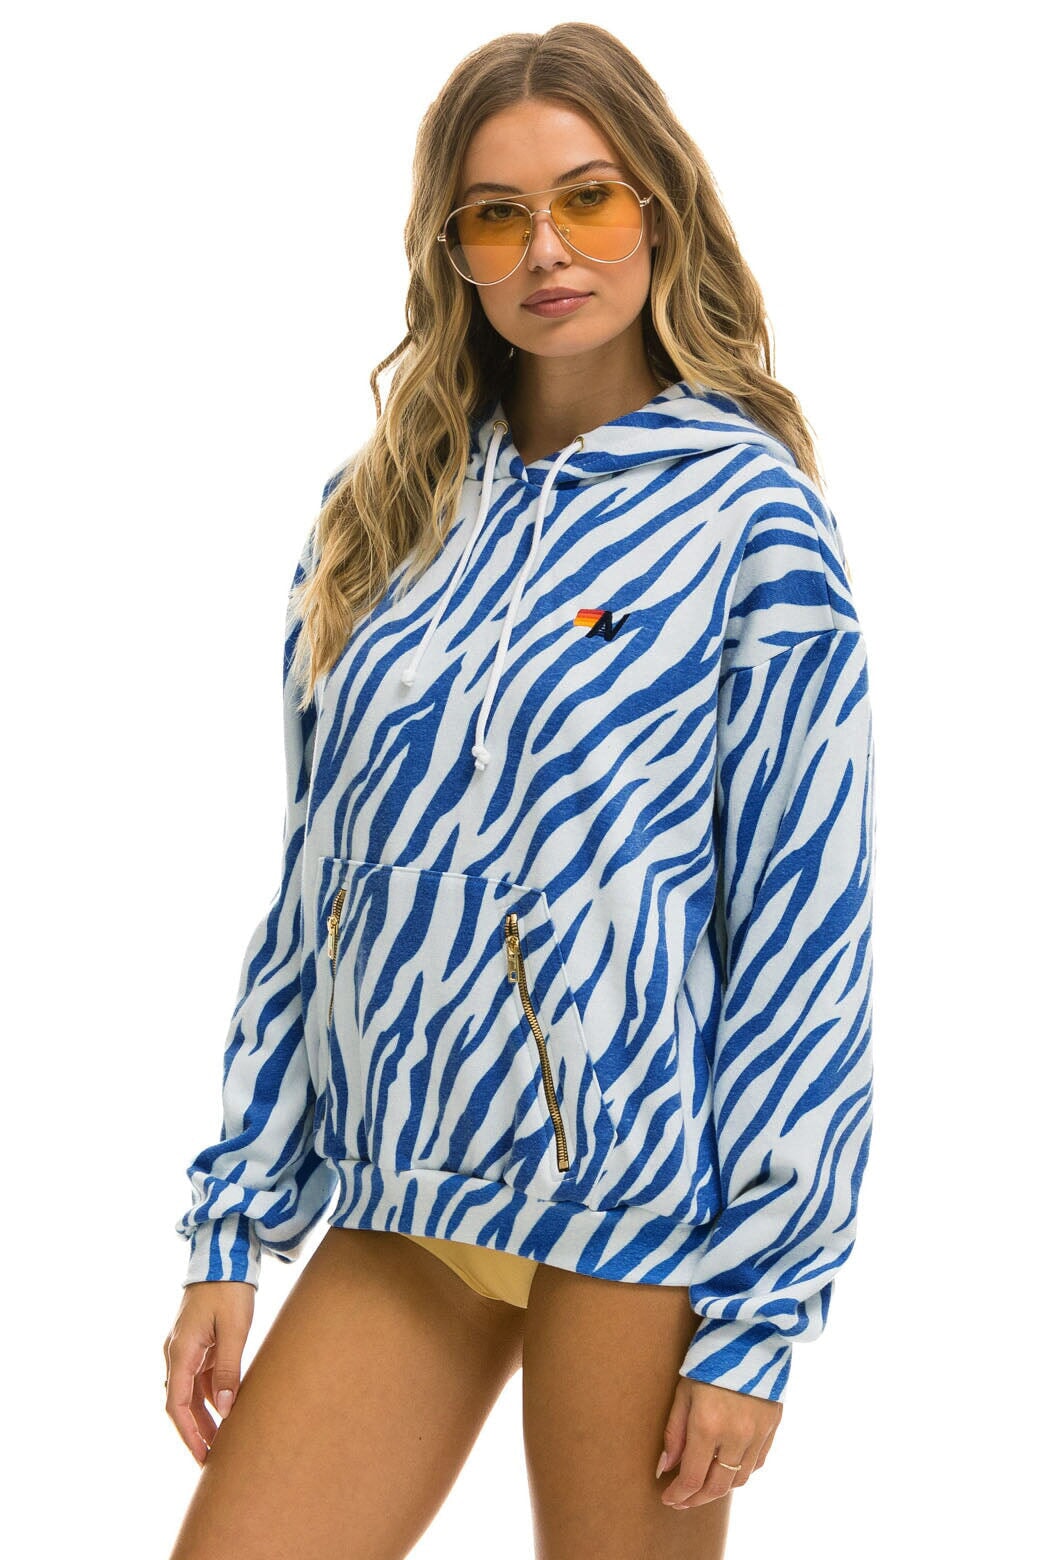 TIGER RELAXED PULLOVER HOODIE WITH ZIPPER POCKETS - BLUE TIGER Hoodie Aviator Nation 